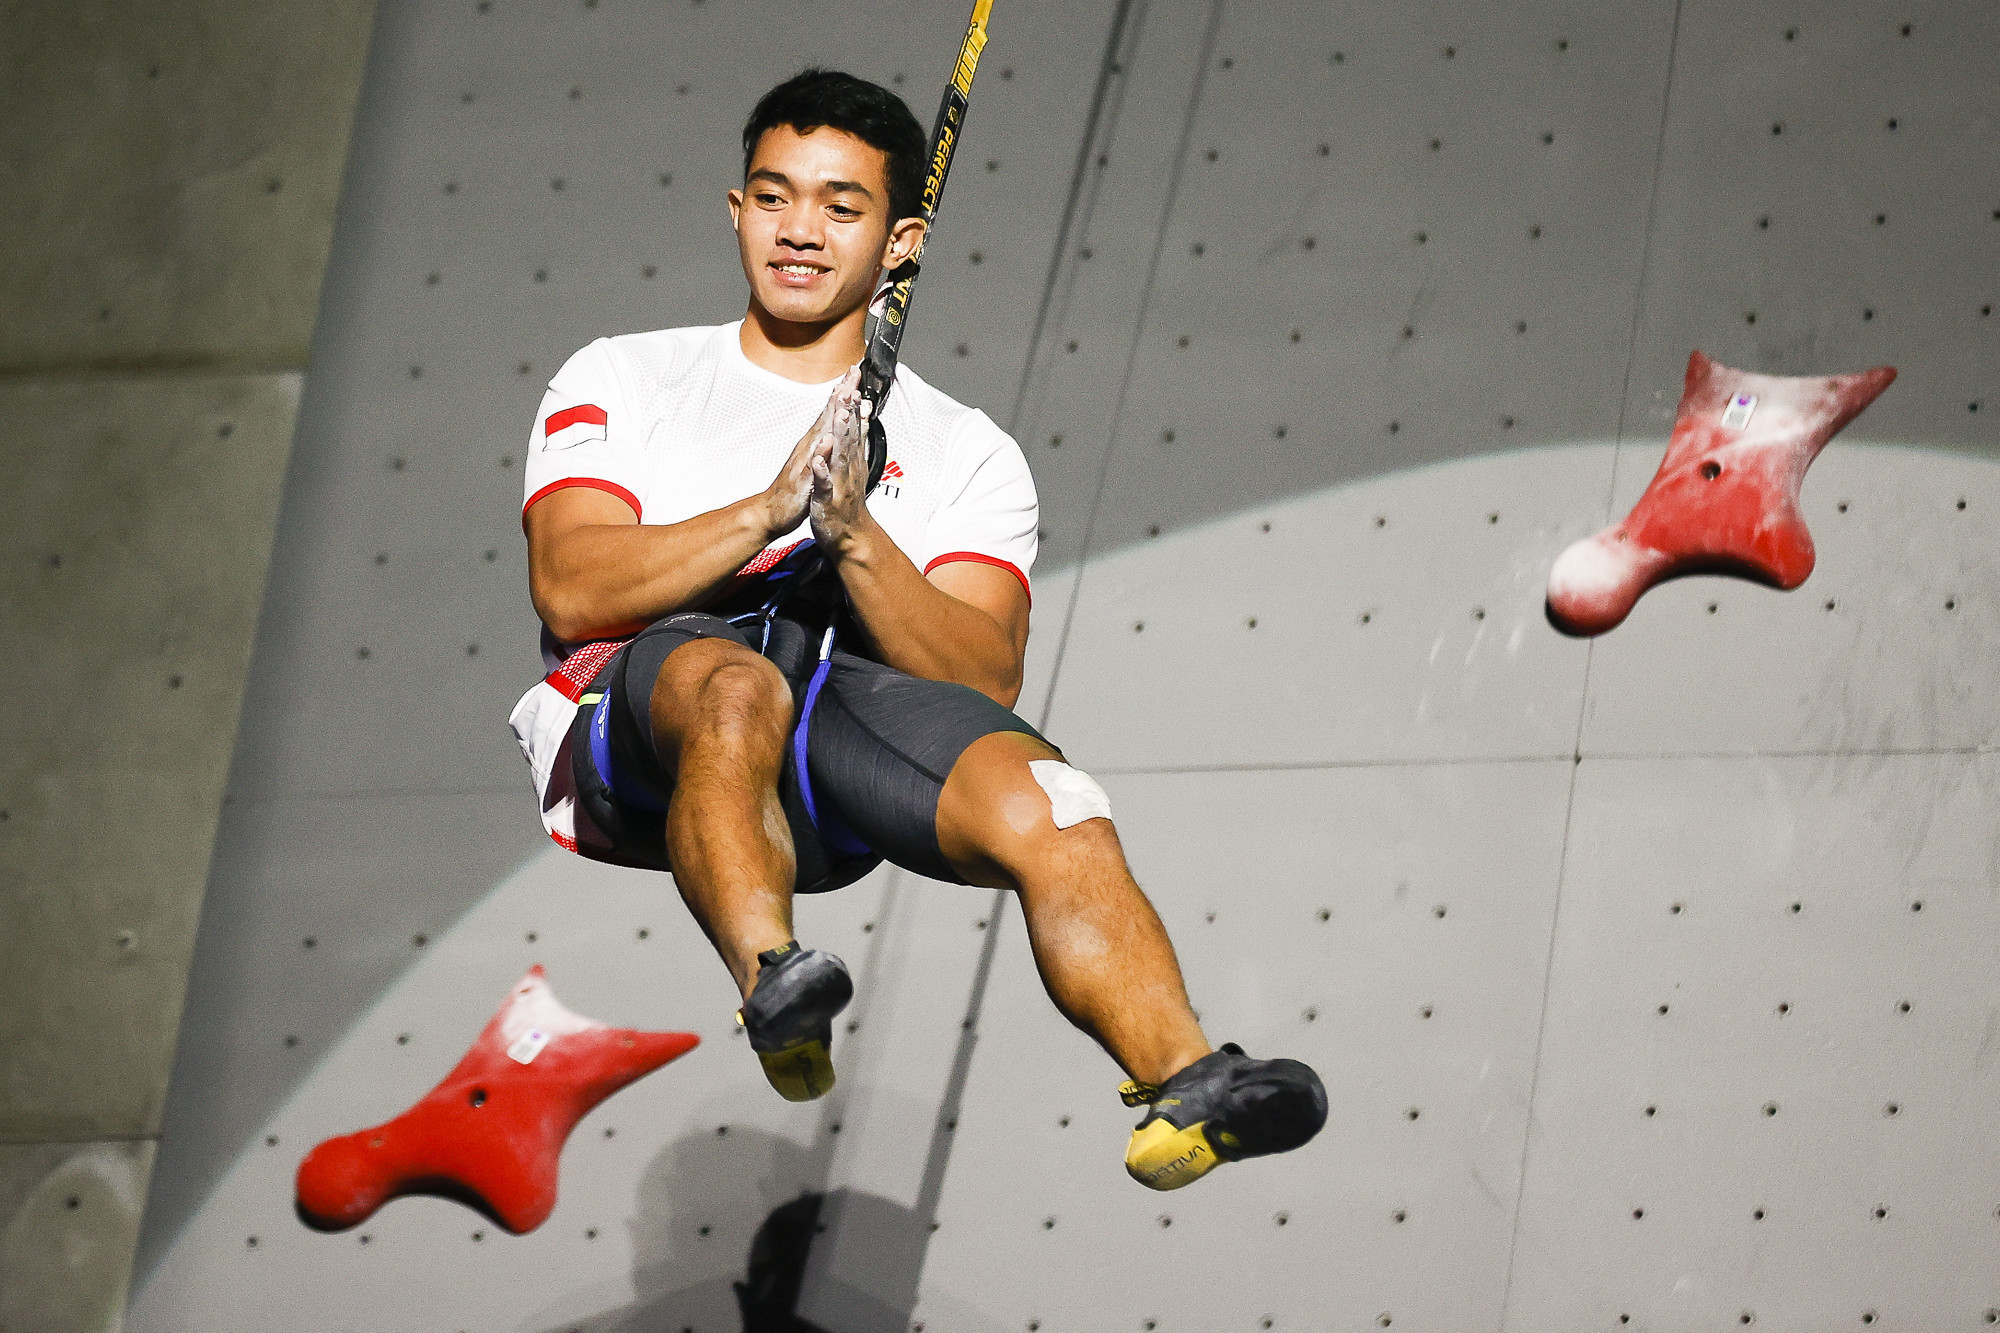 Salt Lake City to host IFSC World Cup doubleheader and record-breaking speed climbers